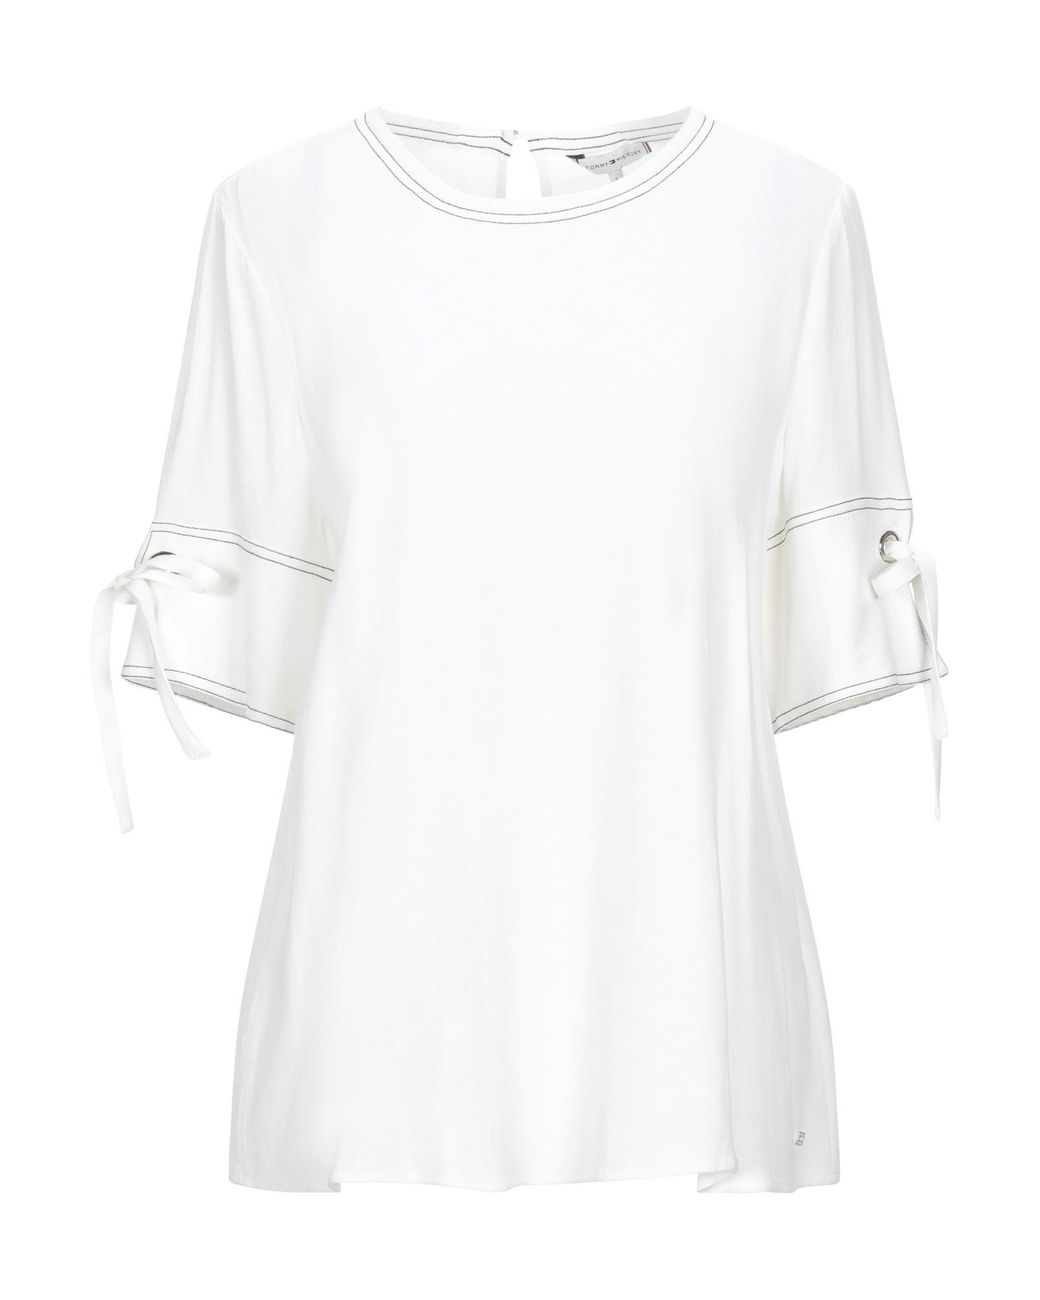 Tommy Hilfiger Synthetic Blouse in White - Lyst